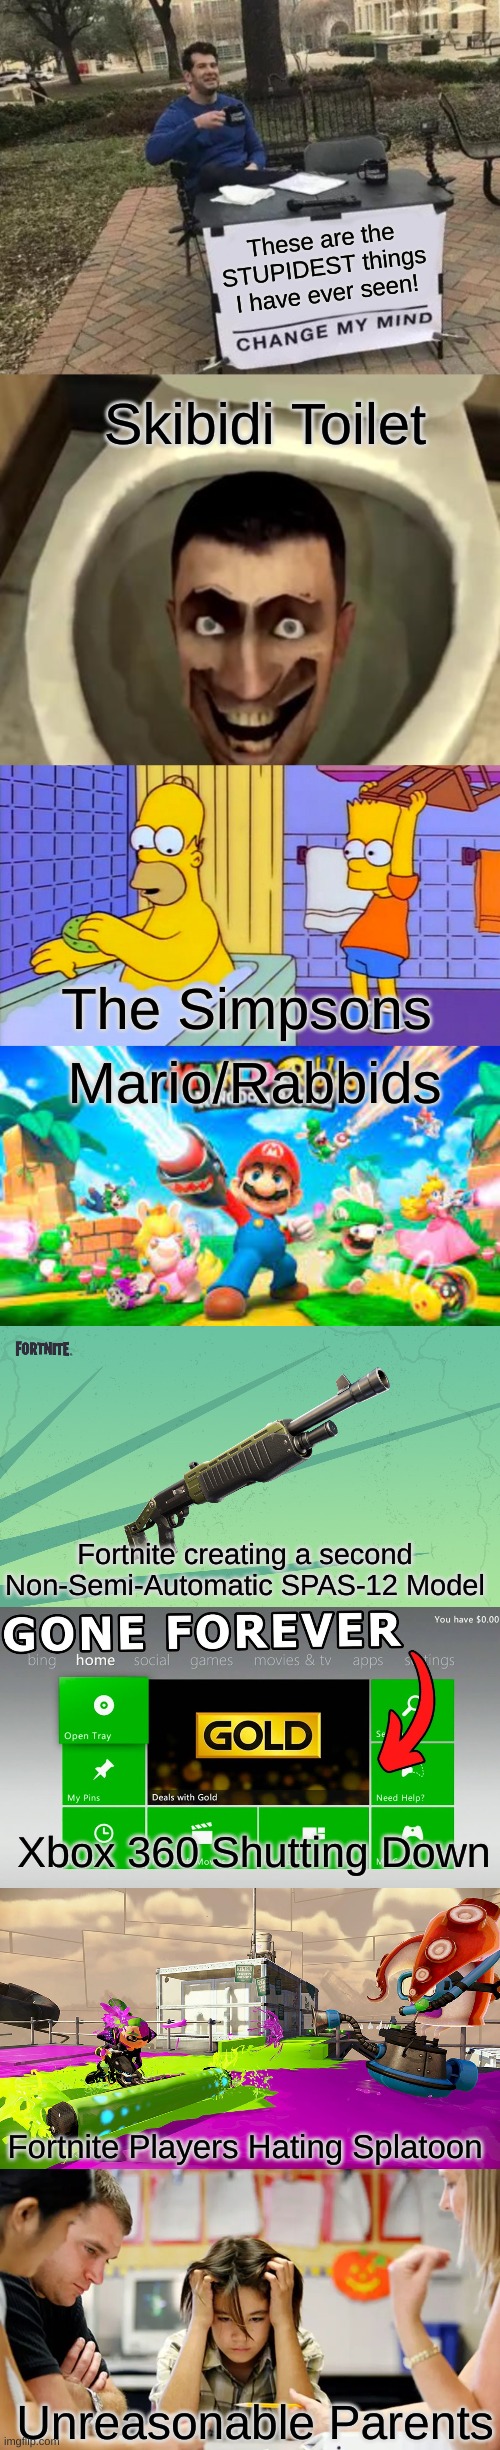 These are the stupidest things I've ever seen!! | These are the STUPIDEST things I have ever seen! Skibidi Toilet; The Simpsons; Mario/Rabbids; Fortnite creating a second Non-Semi-Automatic SPAS-12 Model; Xbox 360 Shutting Down; Fortnite Players Hating Splatoon; Unreasonable Parents | image tagged in memes,change my mind,skibidi toilet,bart hitting homer with a chair | made w/ Imgflip meme maker